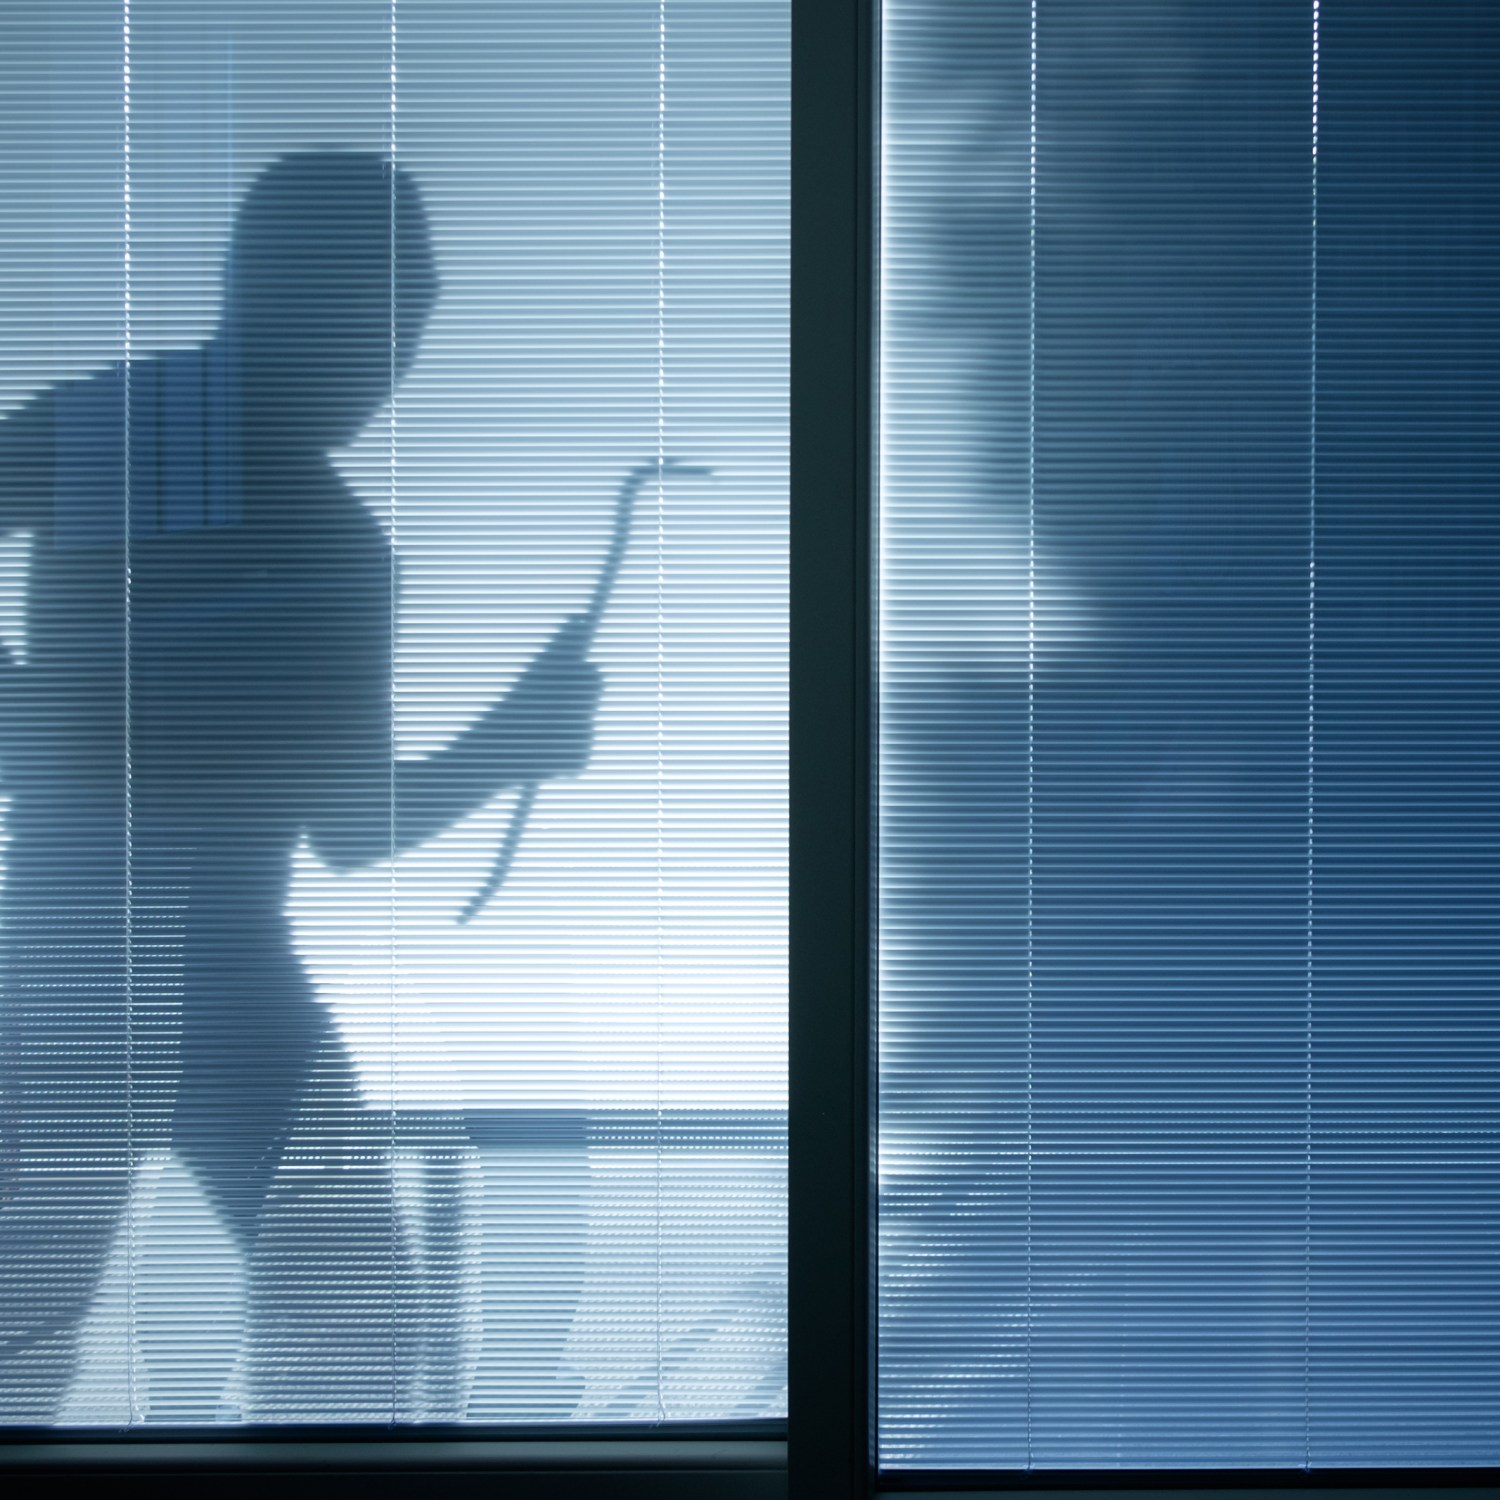 prevent break-in tips silhouette of a burglar wearing a balaclava holding a crowbar looking through a house window